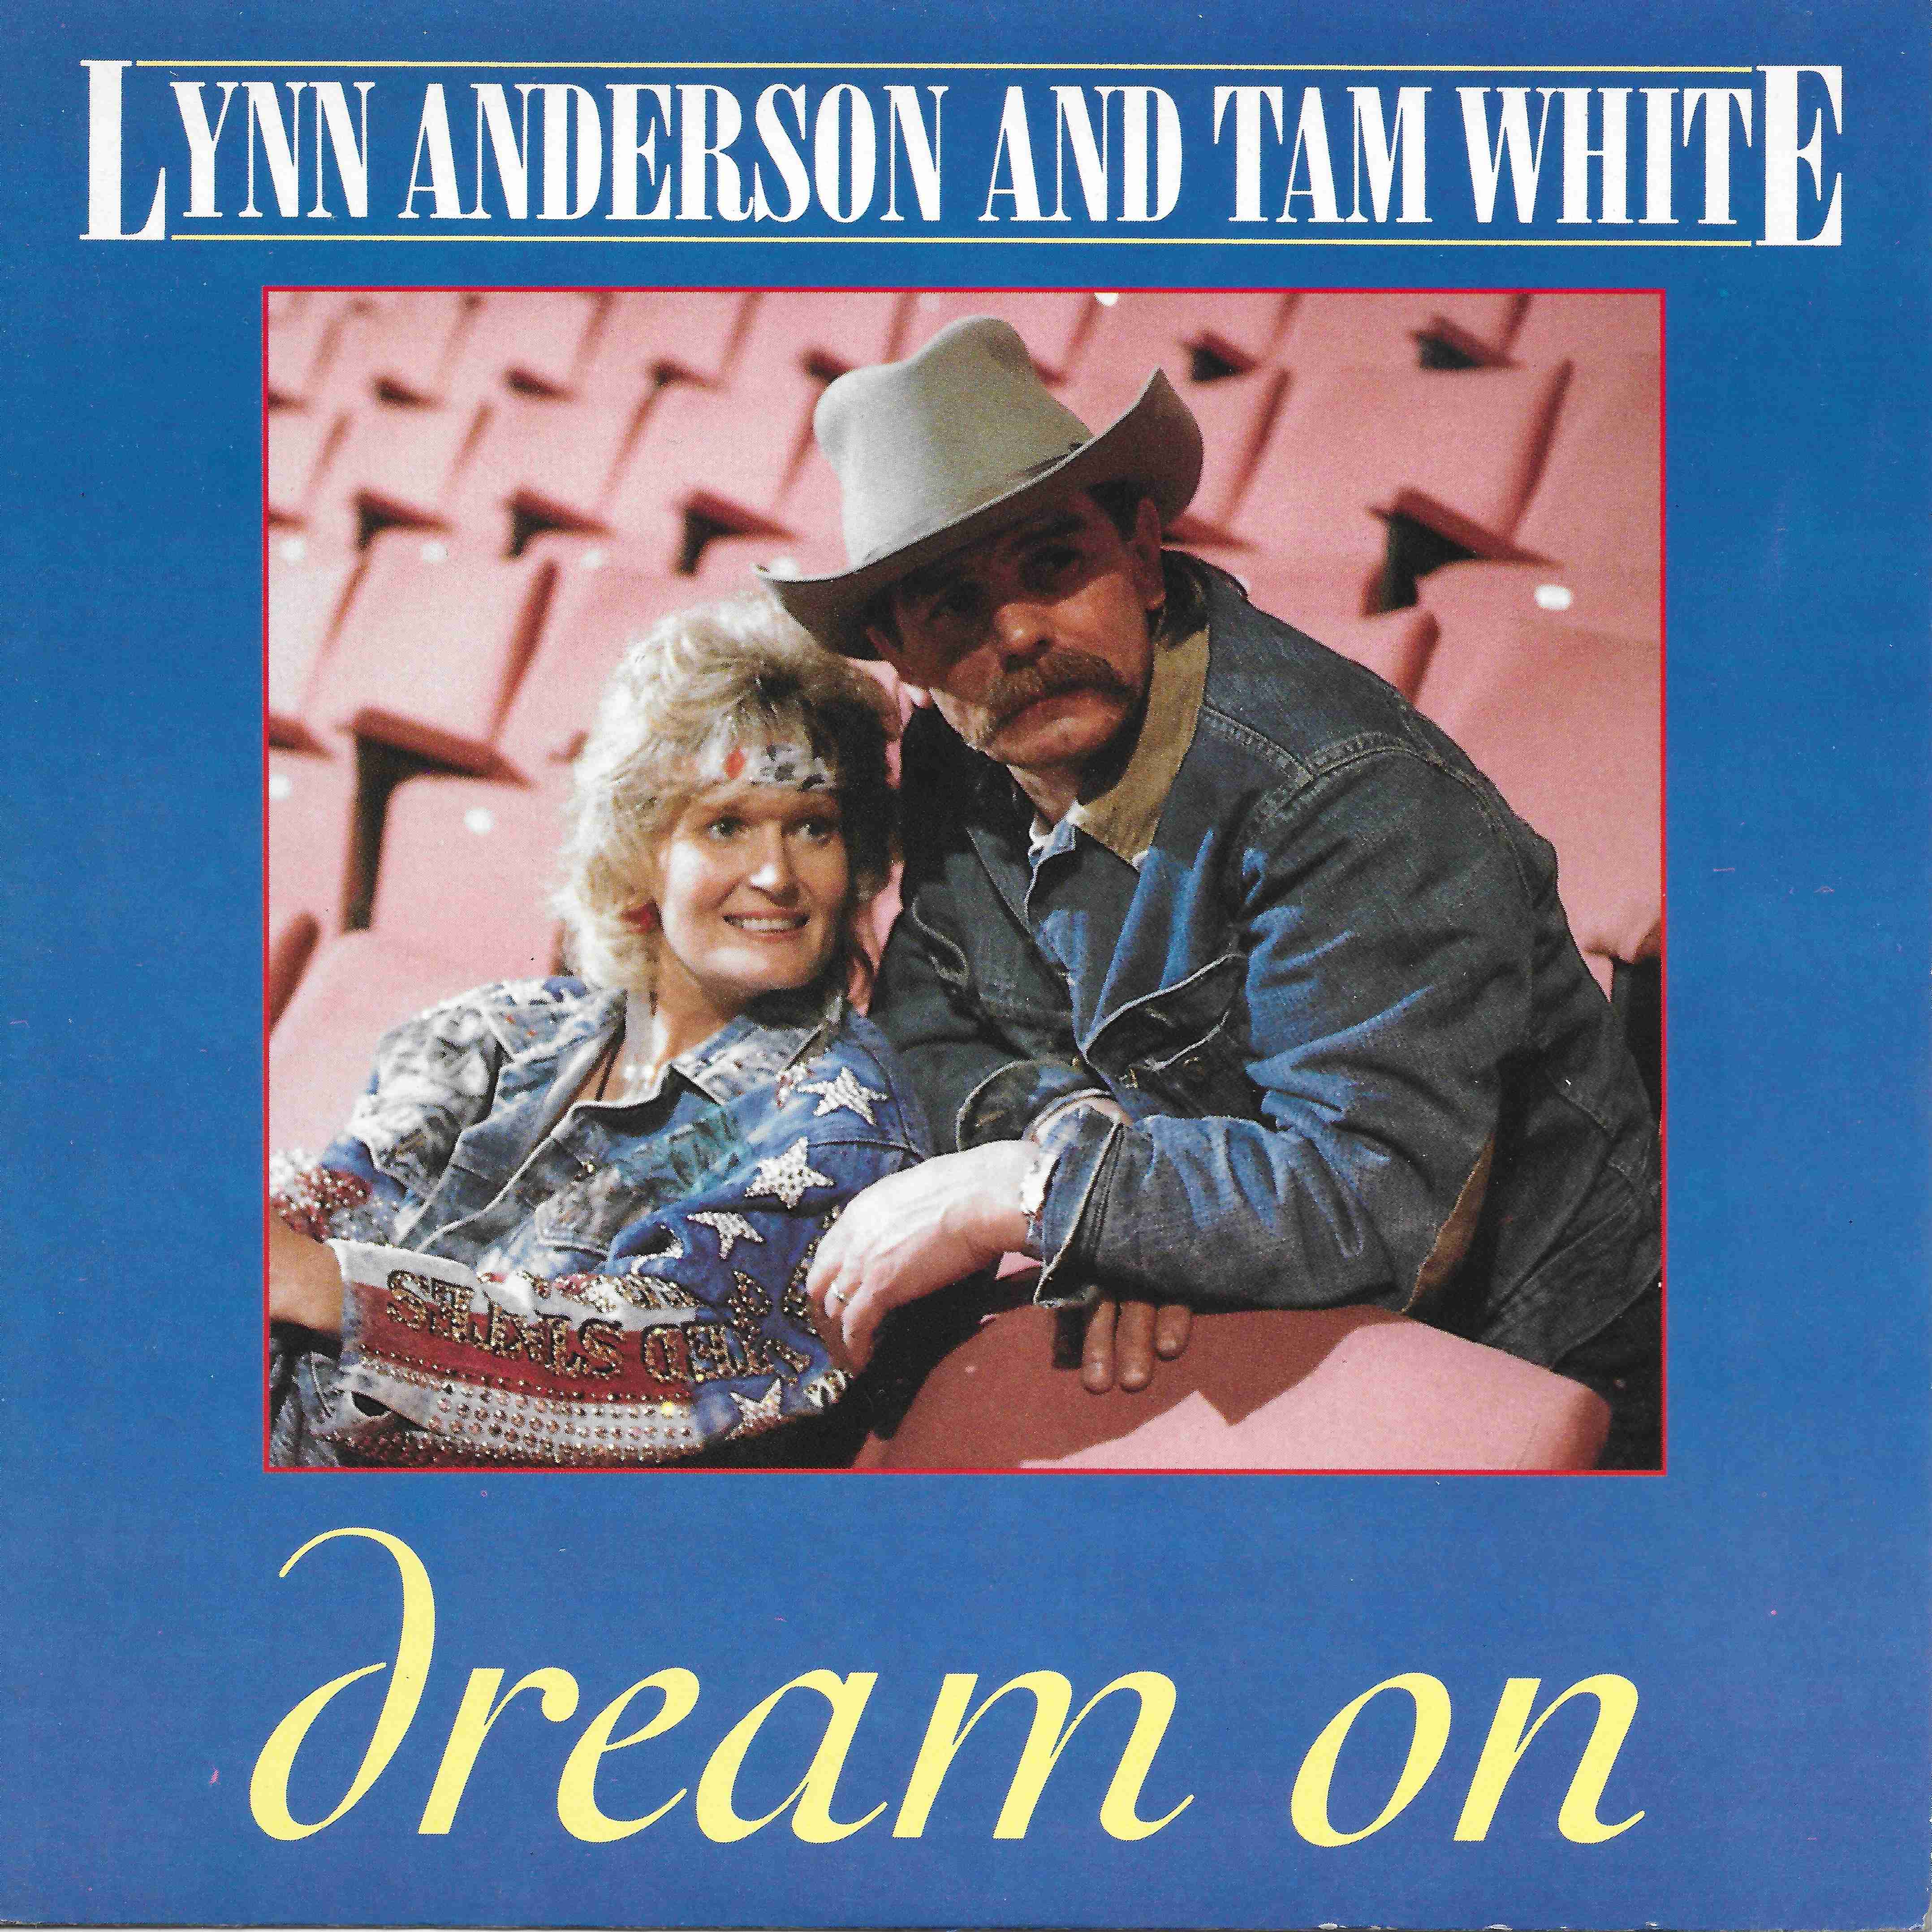 Picture of RESL 245 Dream on by artist Lynn Anderson / Tam White from the BBC singles - Records and Tapes library